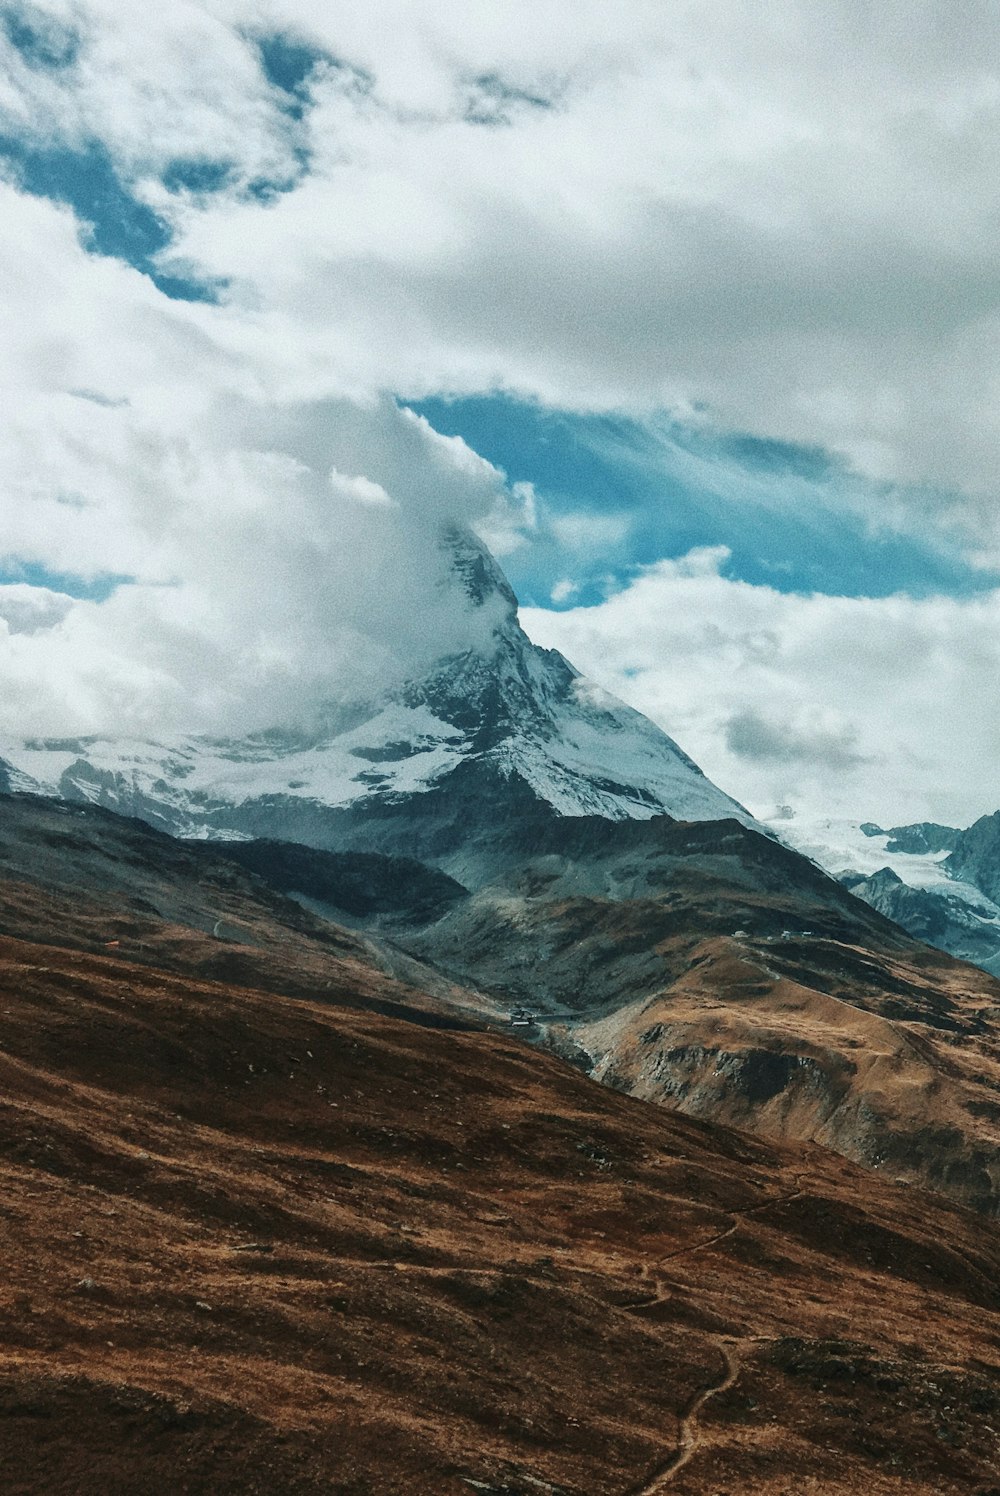 snow-capped mountain covered in cloud